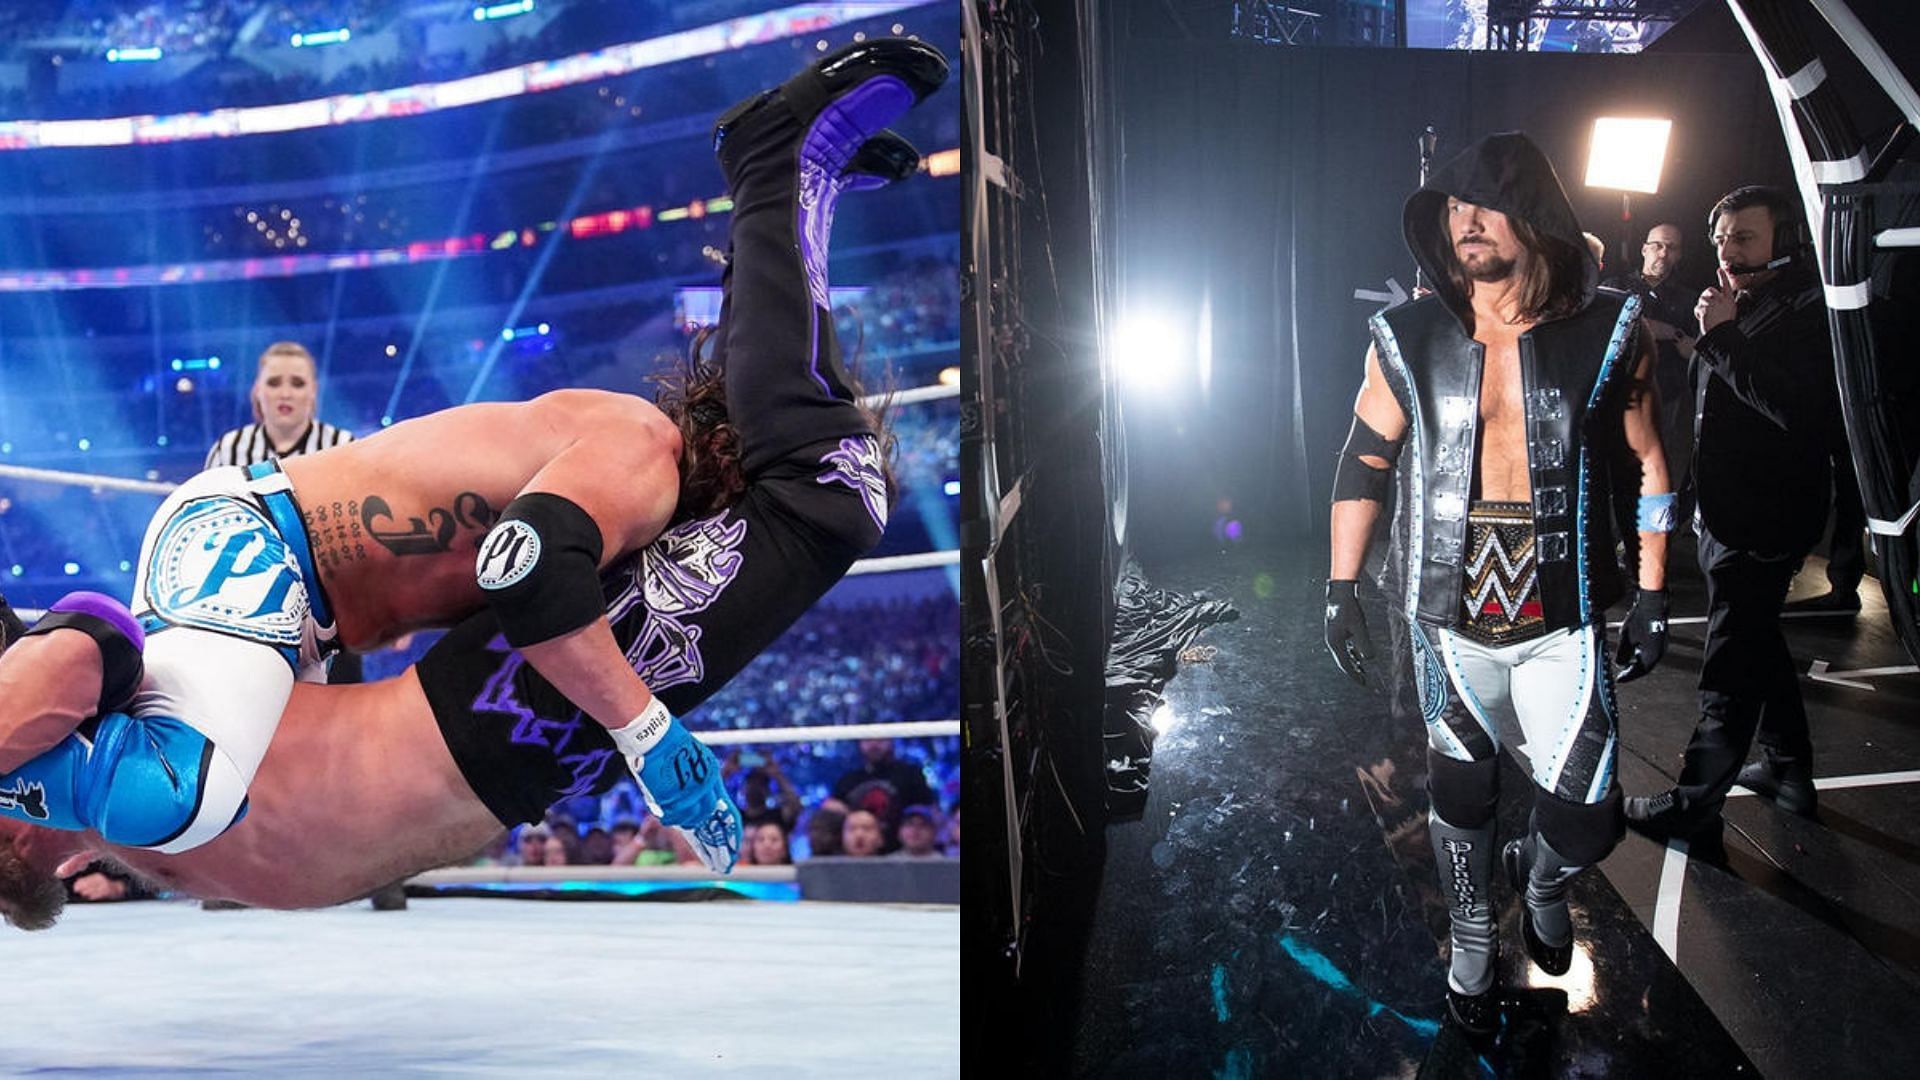 The Styles Clash is AJ Styles